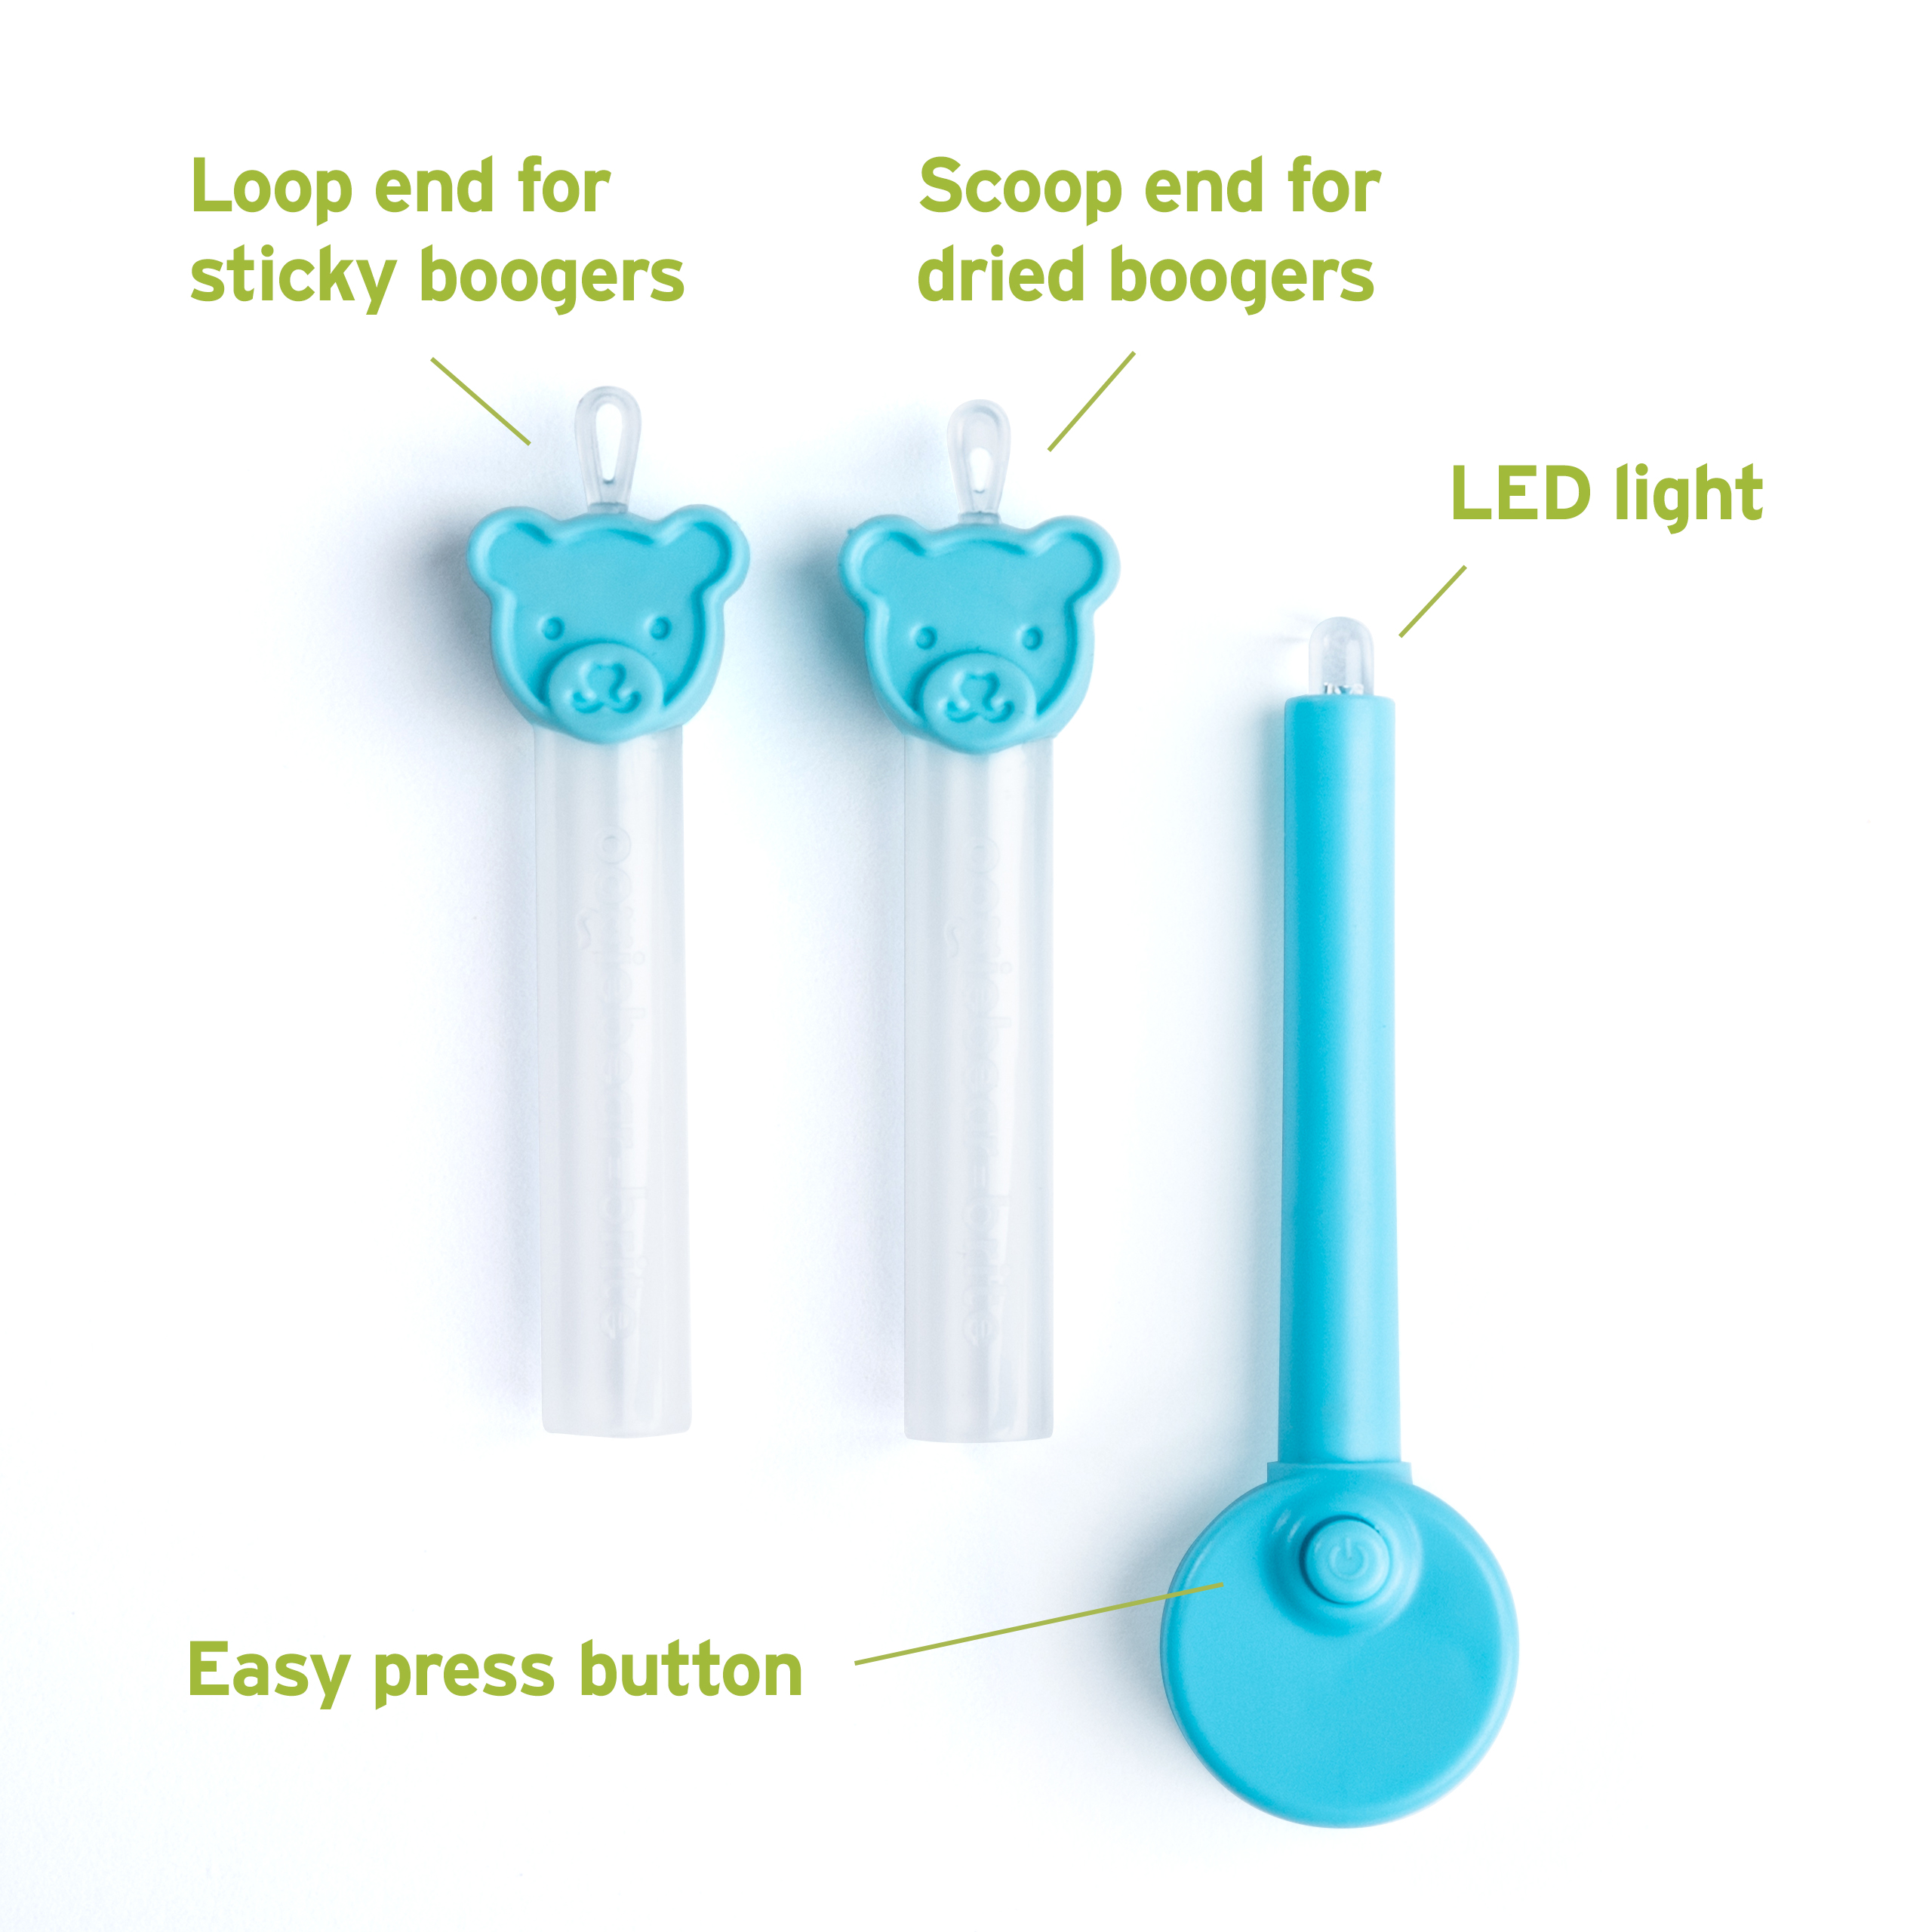 oogiebear brite with two ends, one for sticky boogers and one for dry boogers with led light and easy button